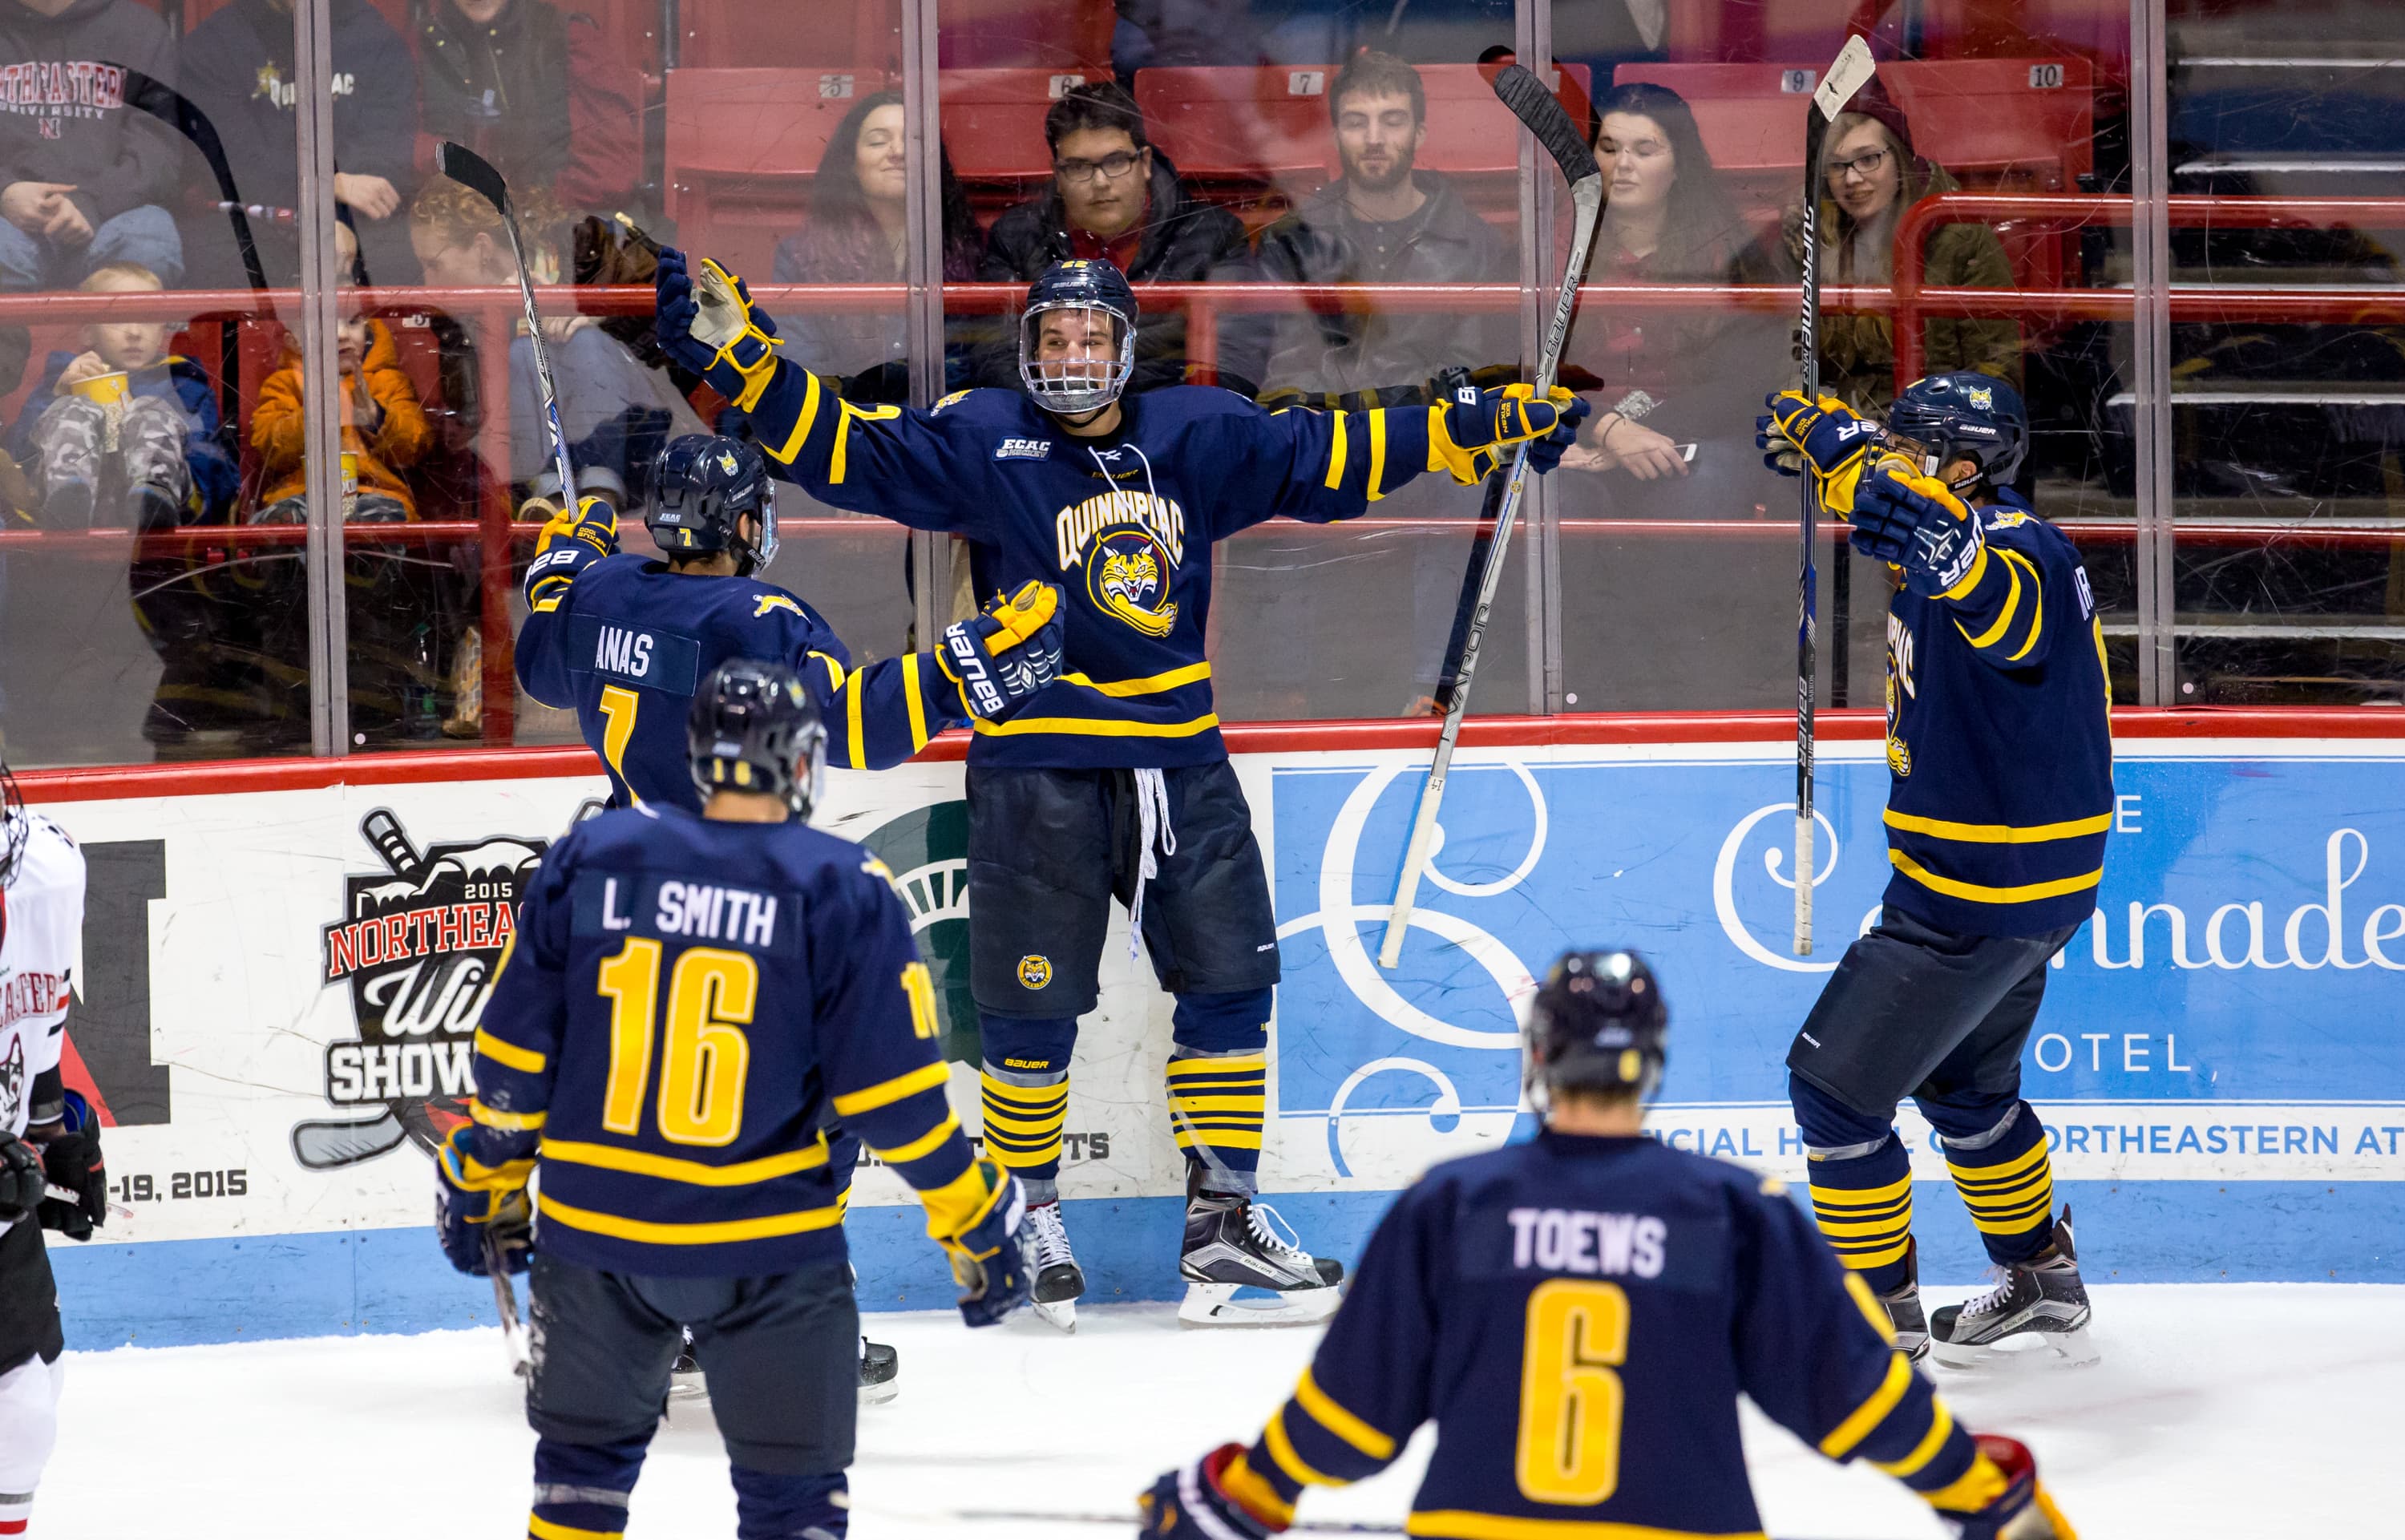 Quinnipiac's Bobcats hope to clinch the title at Frozen Four